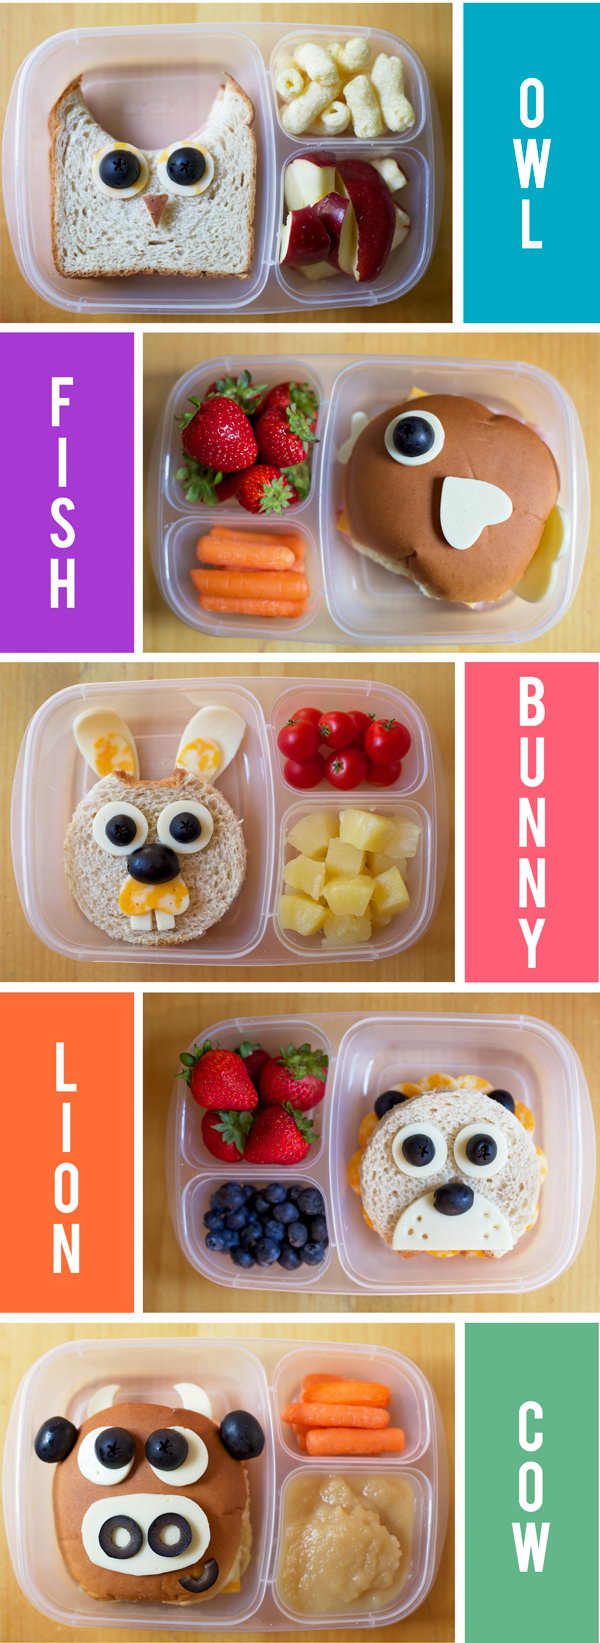 44+ Lunch Ideas For Toddlers Pictures